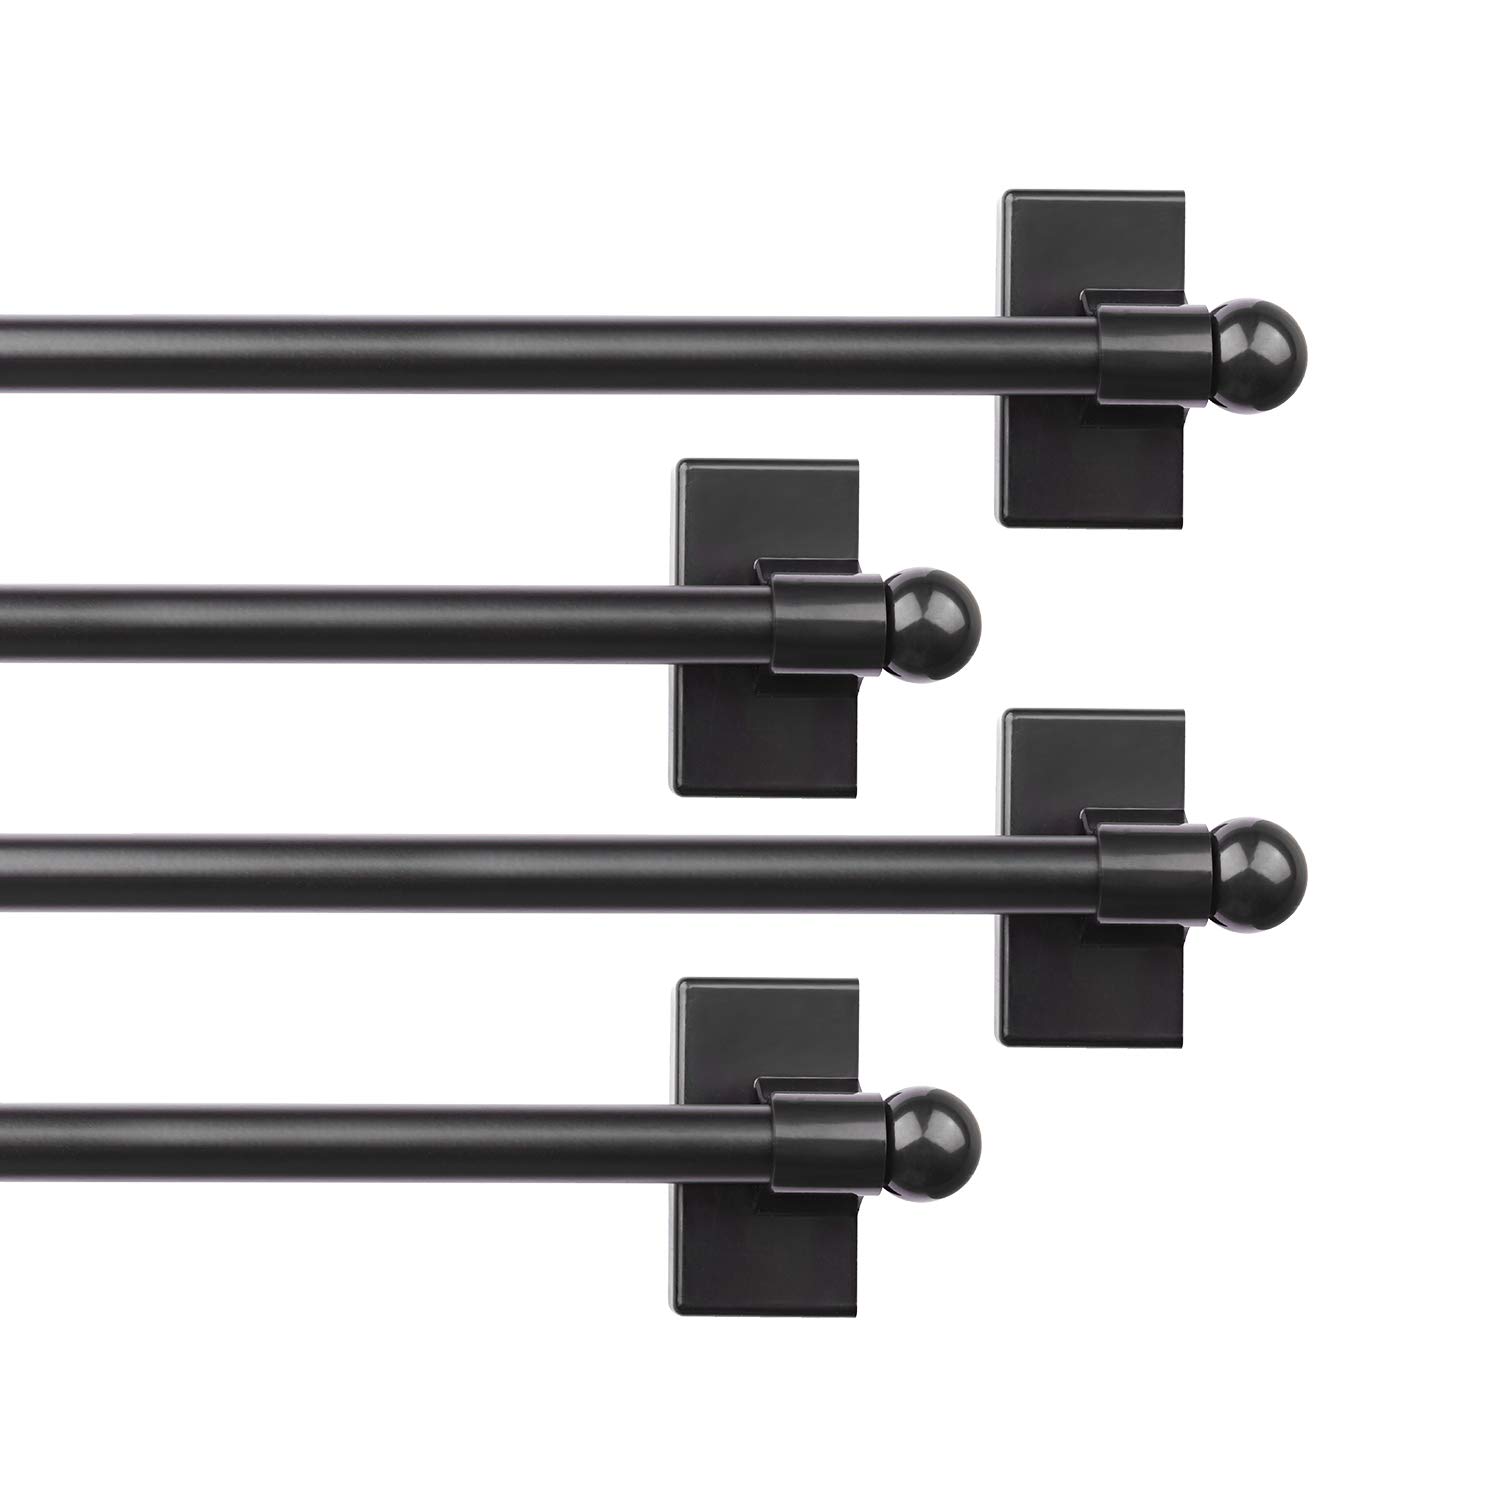 Adjustable Magnetic Rods for Metal Appliance, Doors, Windows,16 to 28 Inch/4 Pack/Easy Installation Toilet Towel Bar, Muti-Useful (Black, 4pack)